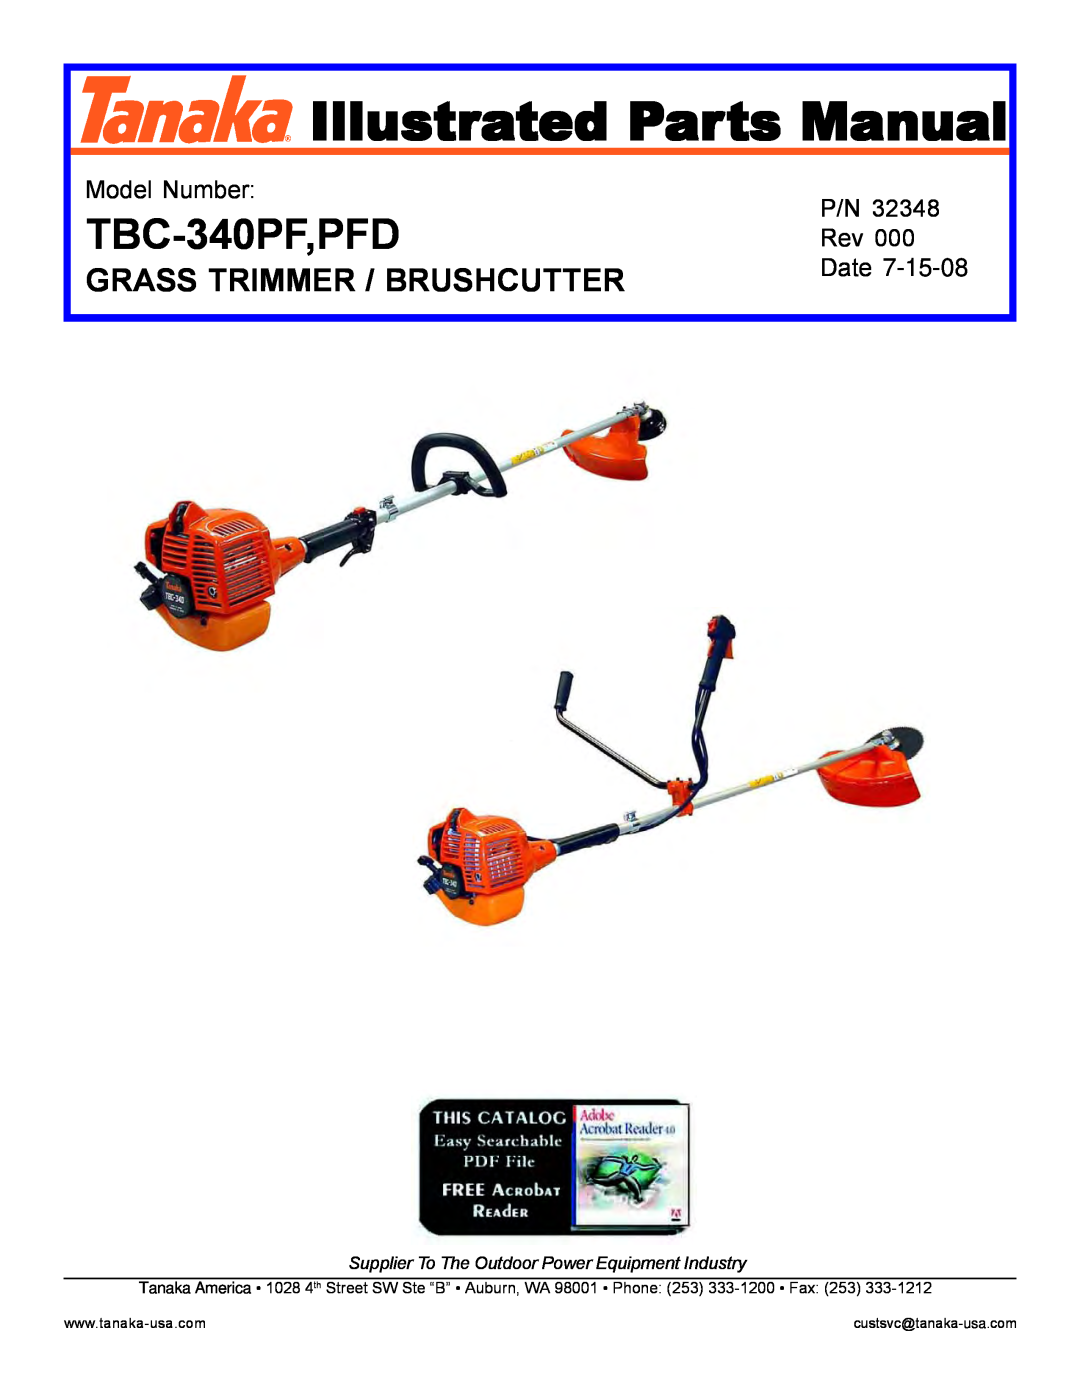 Tanaka manual TBC-340PF,PFD, Grass Trimmer / Brushcutter, Illustrated Parts Manual, Model Number, Date 